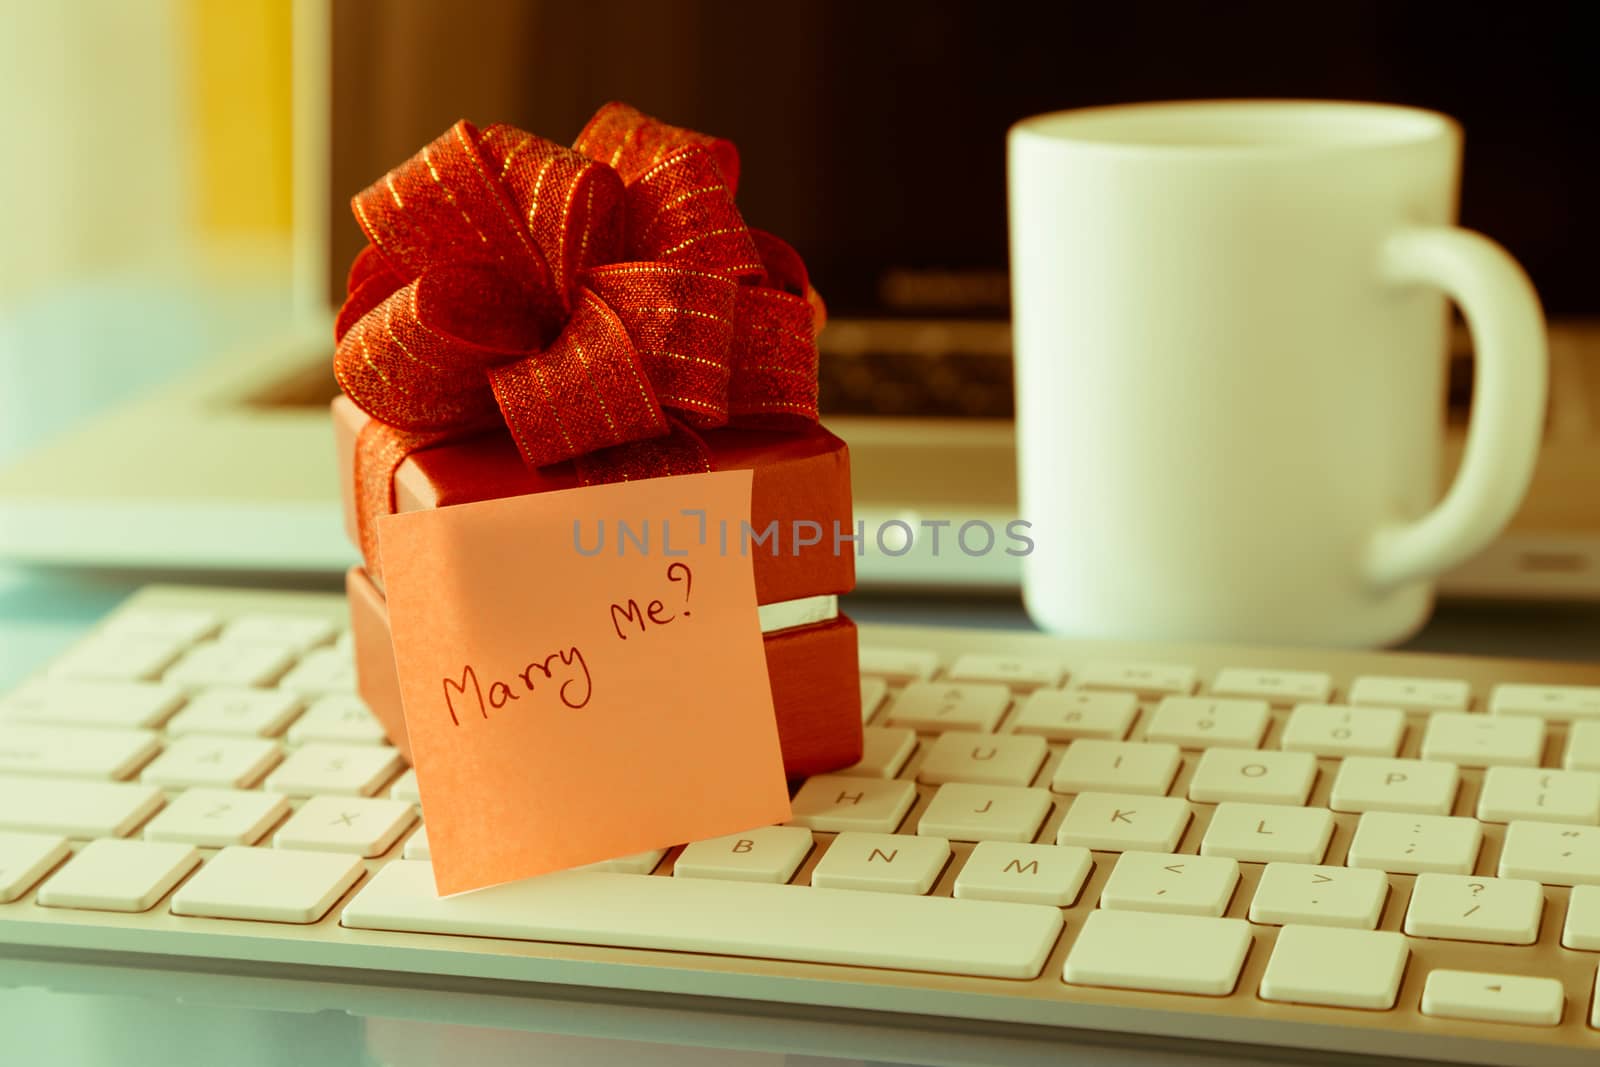 Romantic gift with Marry me? love message, valentine's day conce by vinnstock